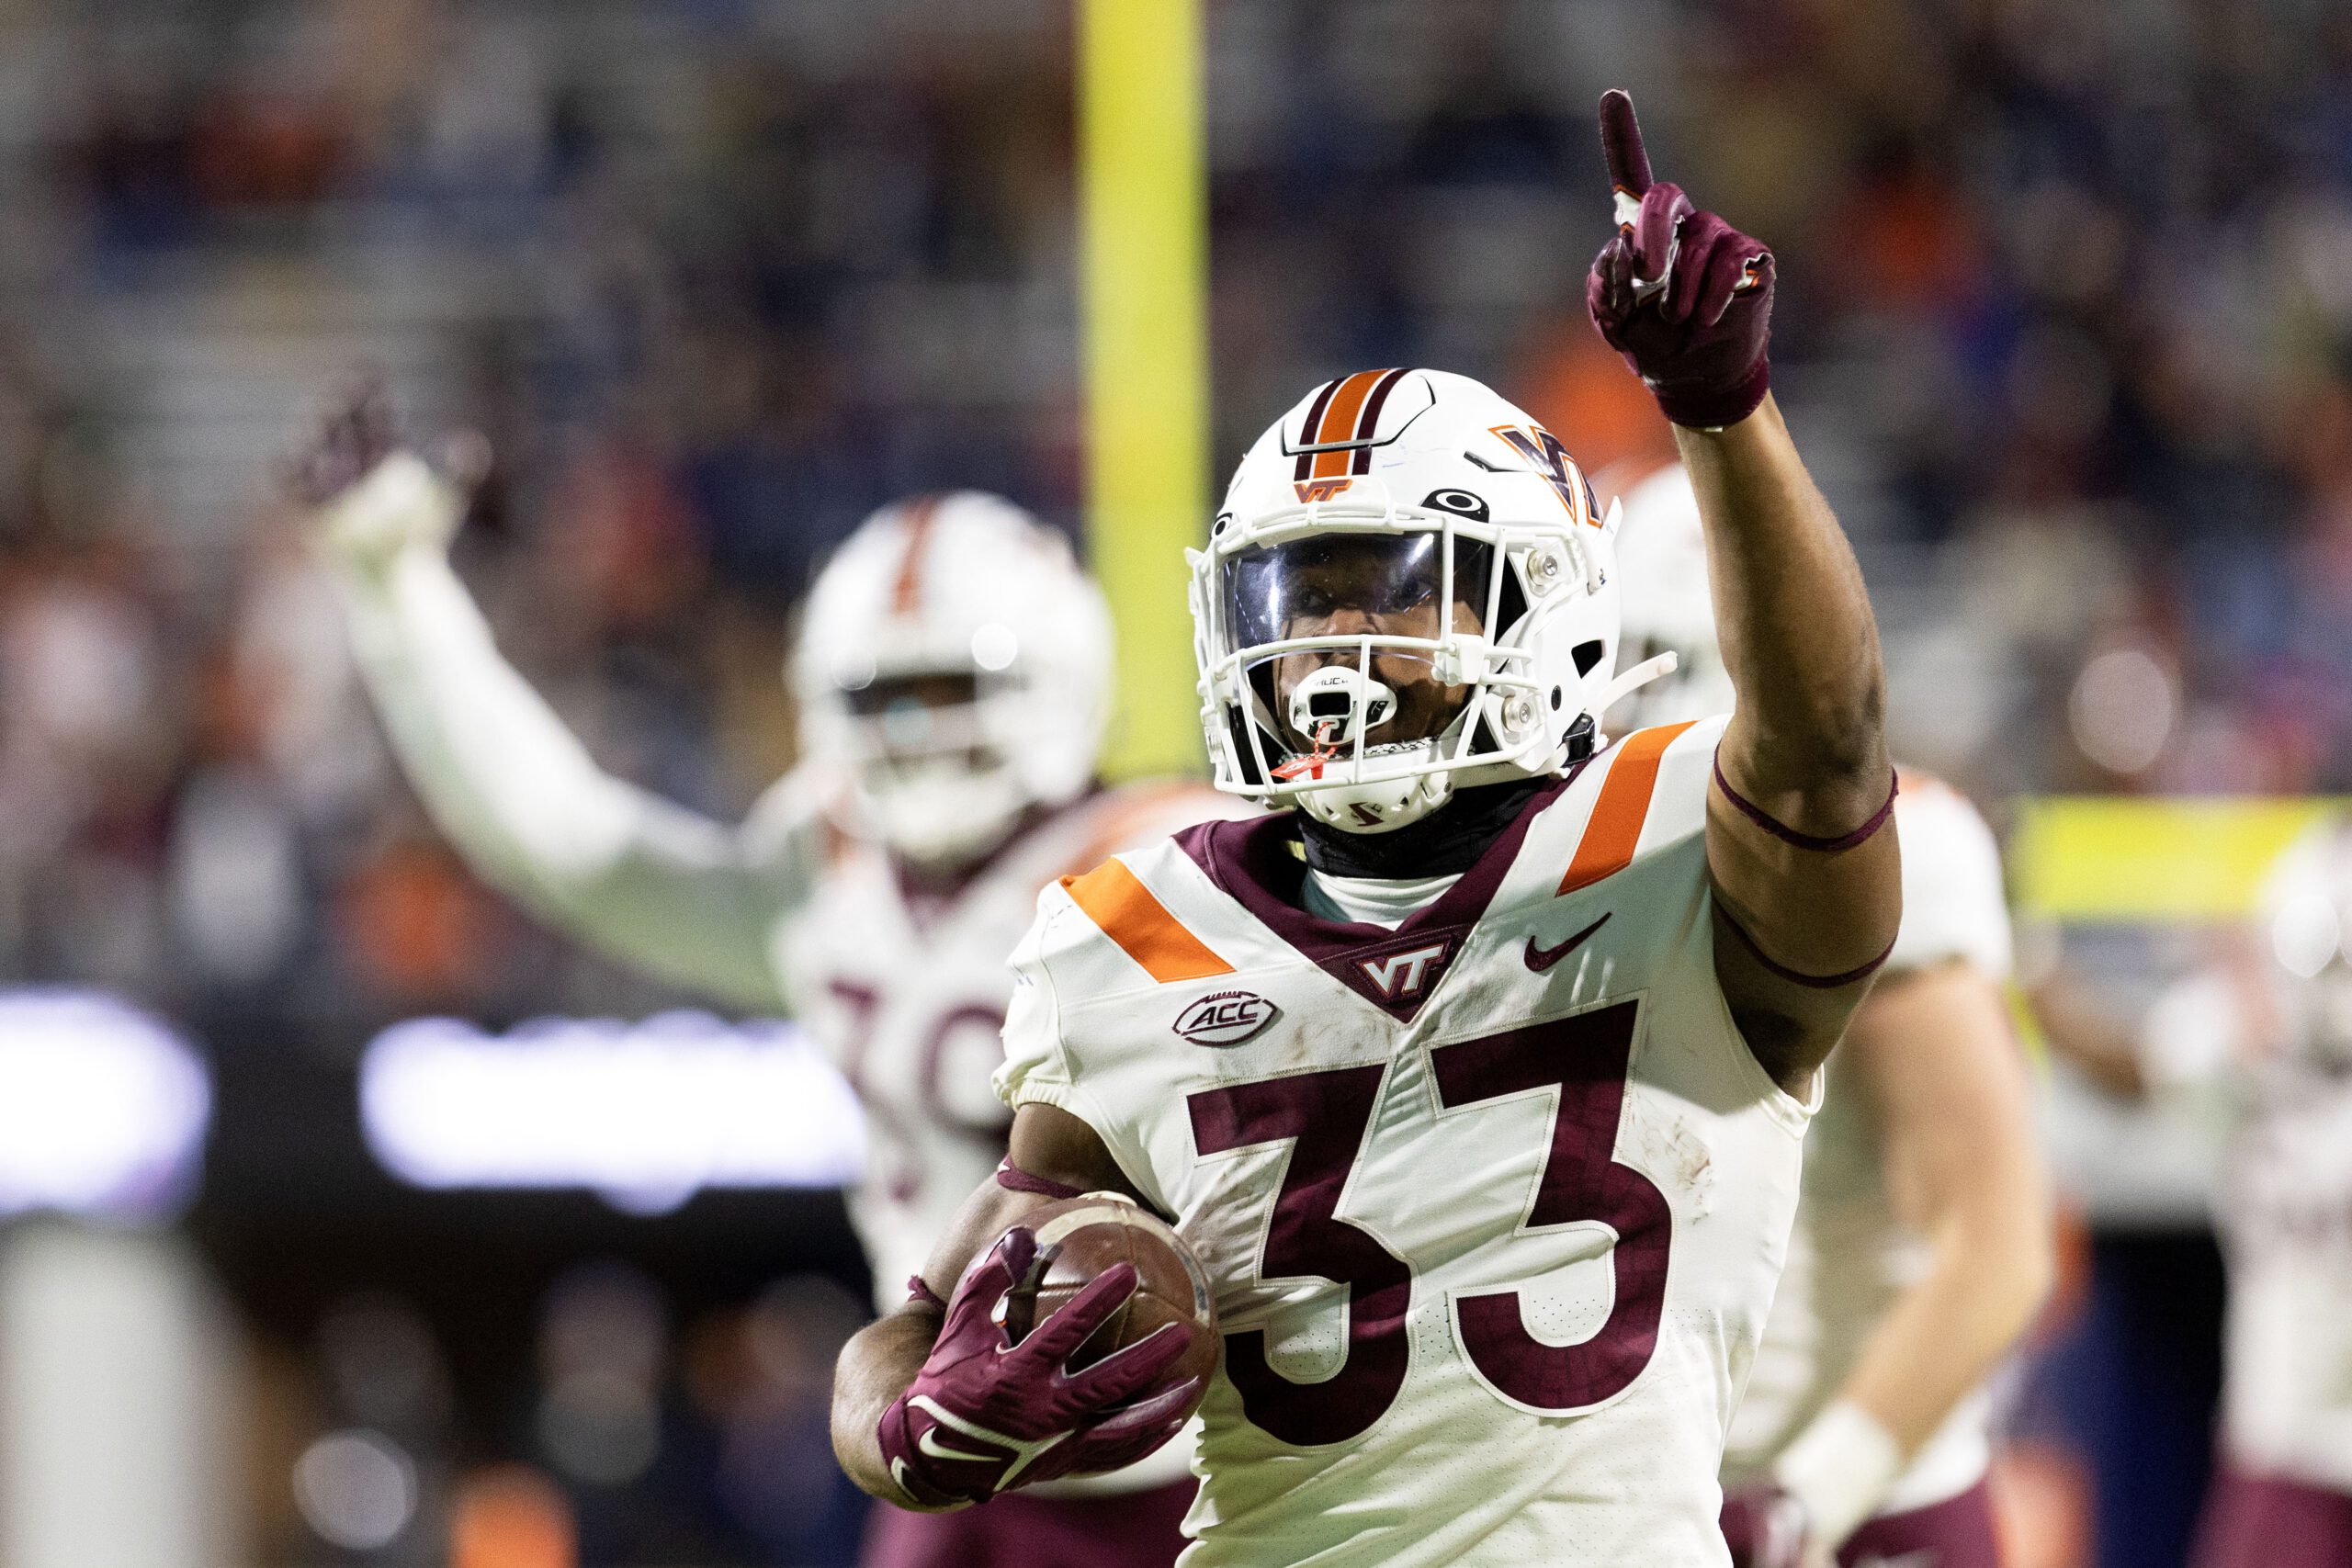 Virginia Tech player holds a football and points in the air.